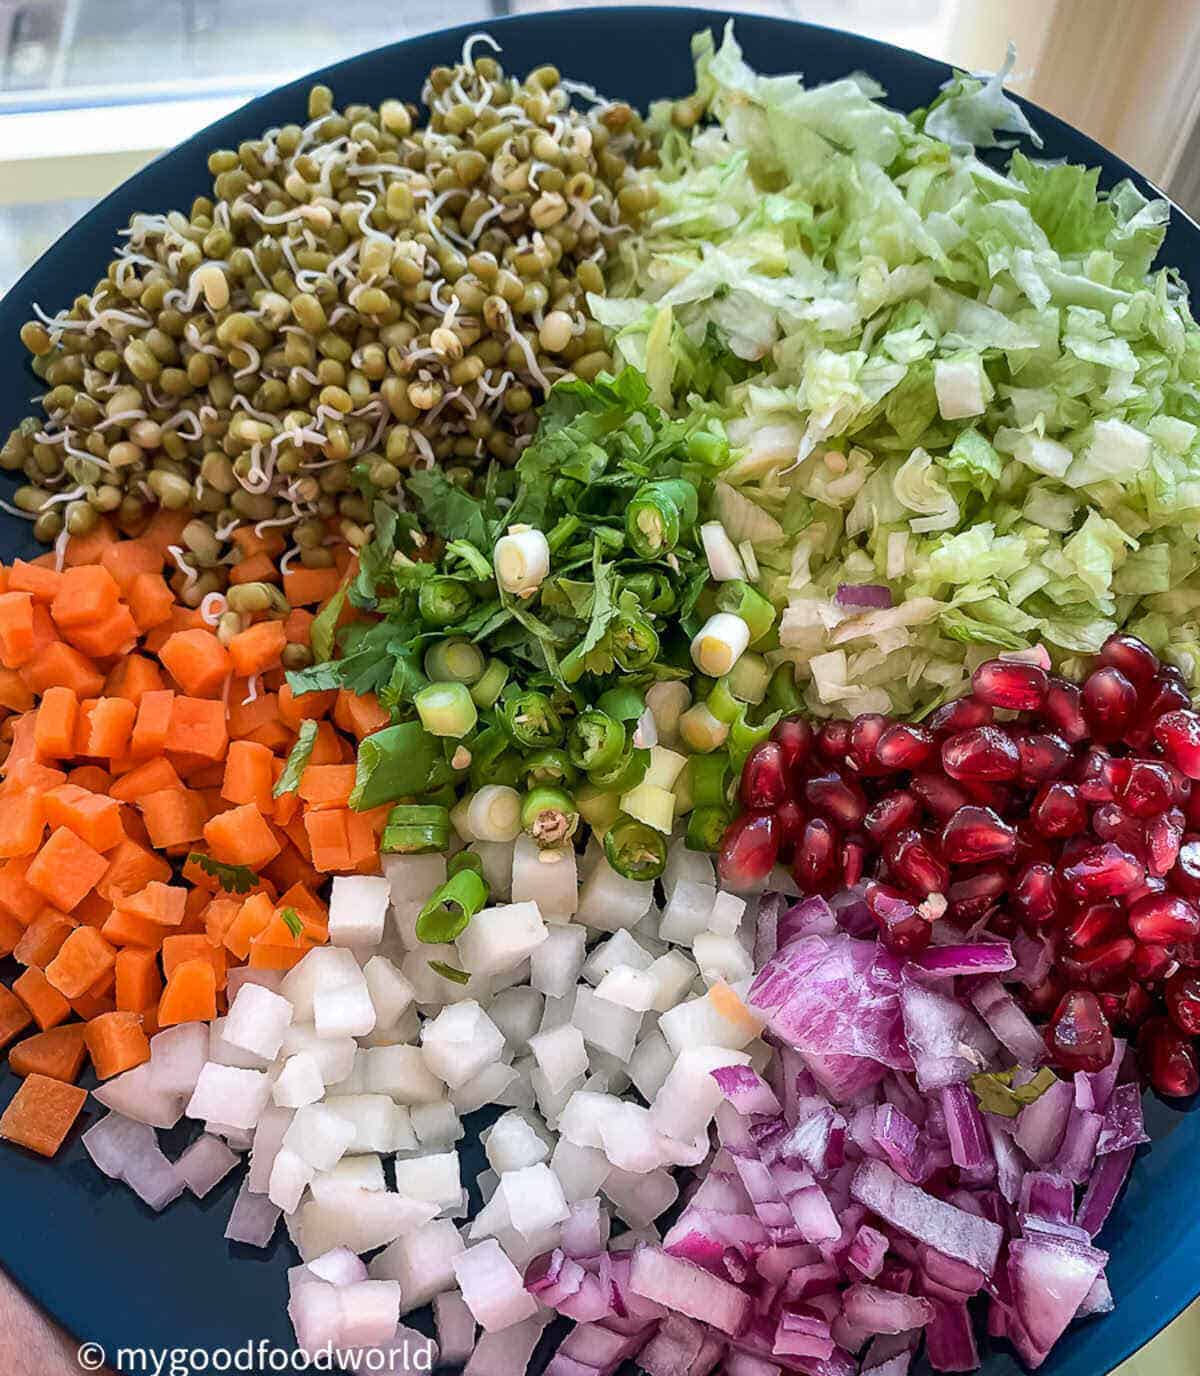 Dice daikon radish, carrots, red onions, lettuce, scallions, and green chilies along with sprouted mung beans and pomegranate arils arranged on a blue plate.